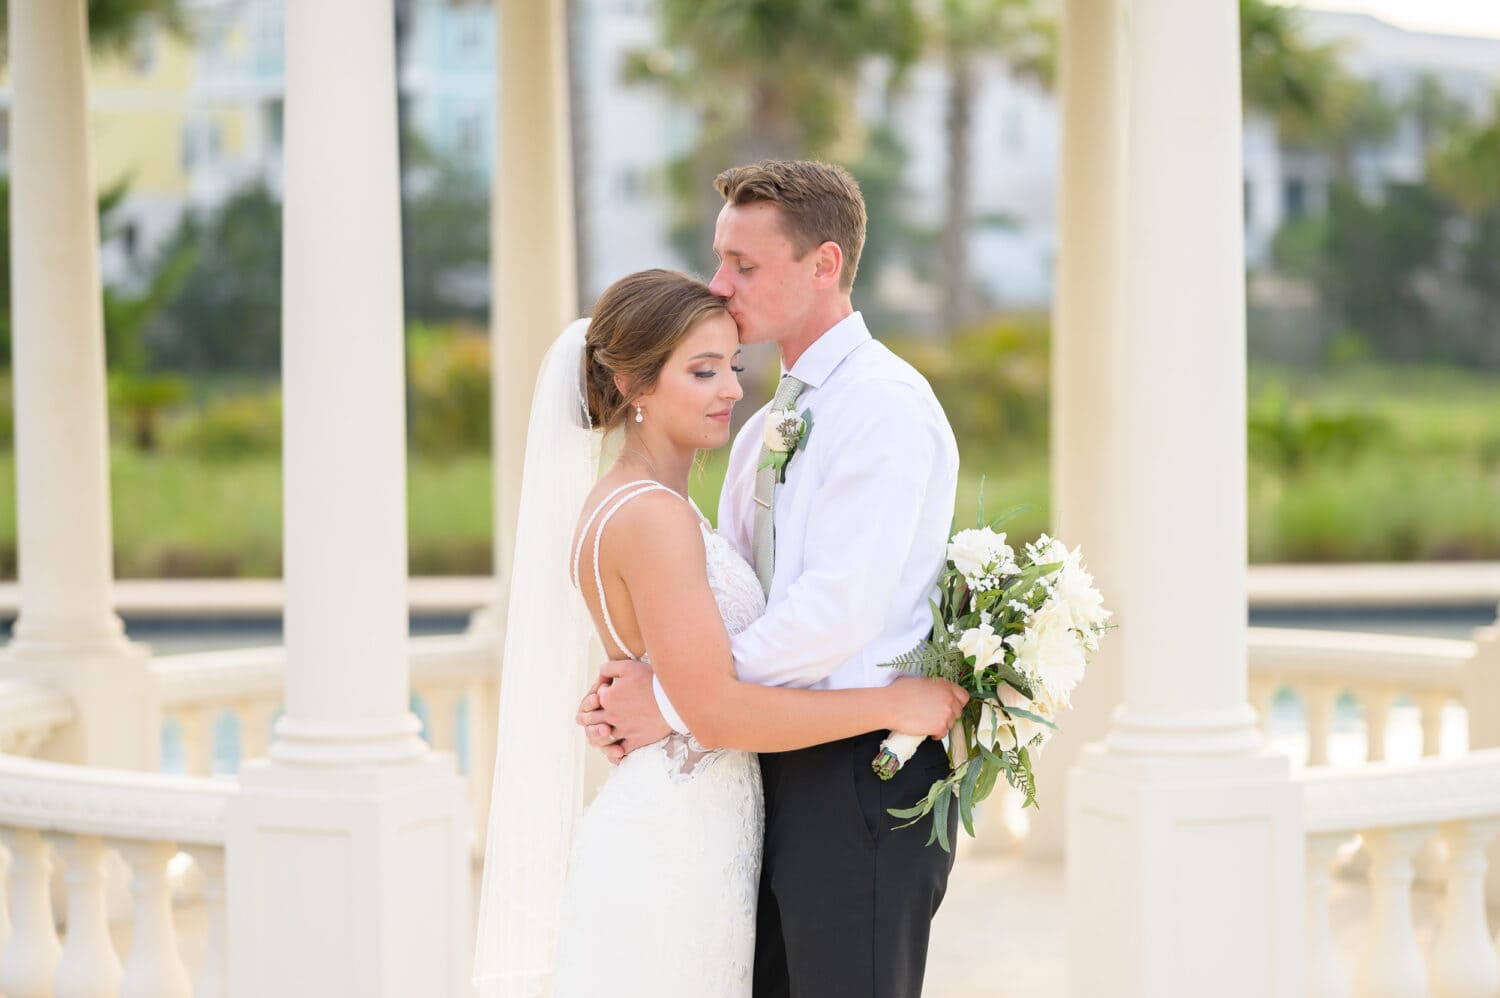 Groom kissing his bride on the head by the gazebo - 21 Main Events